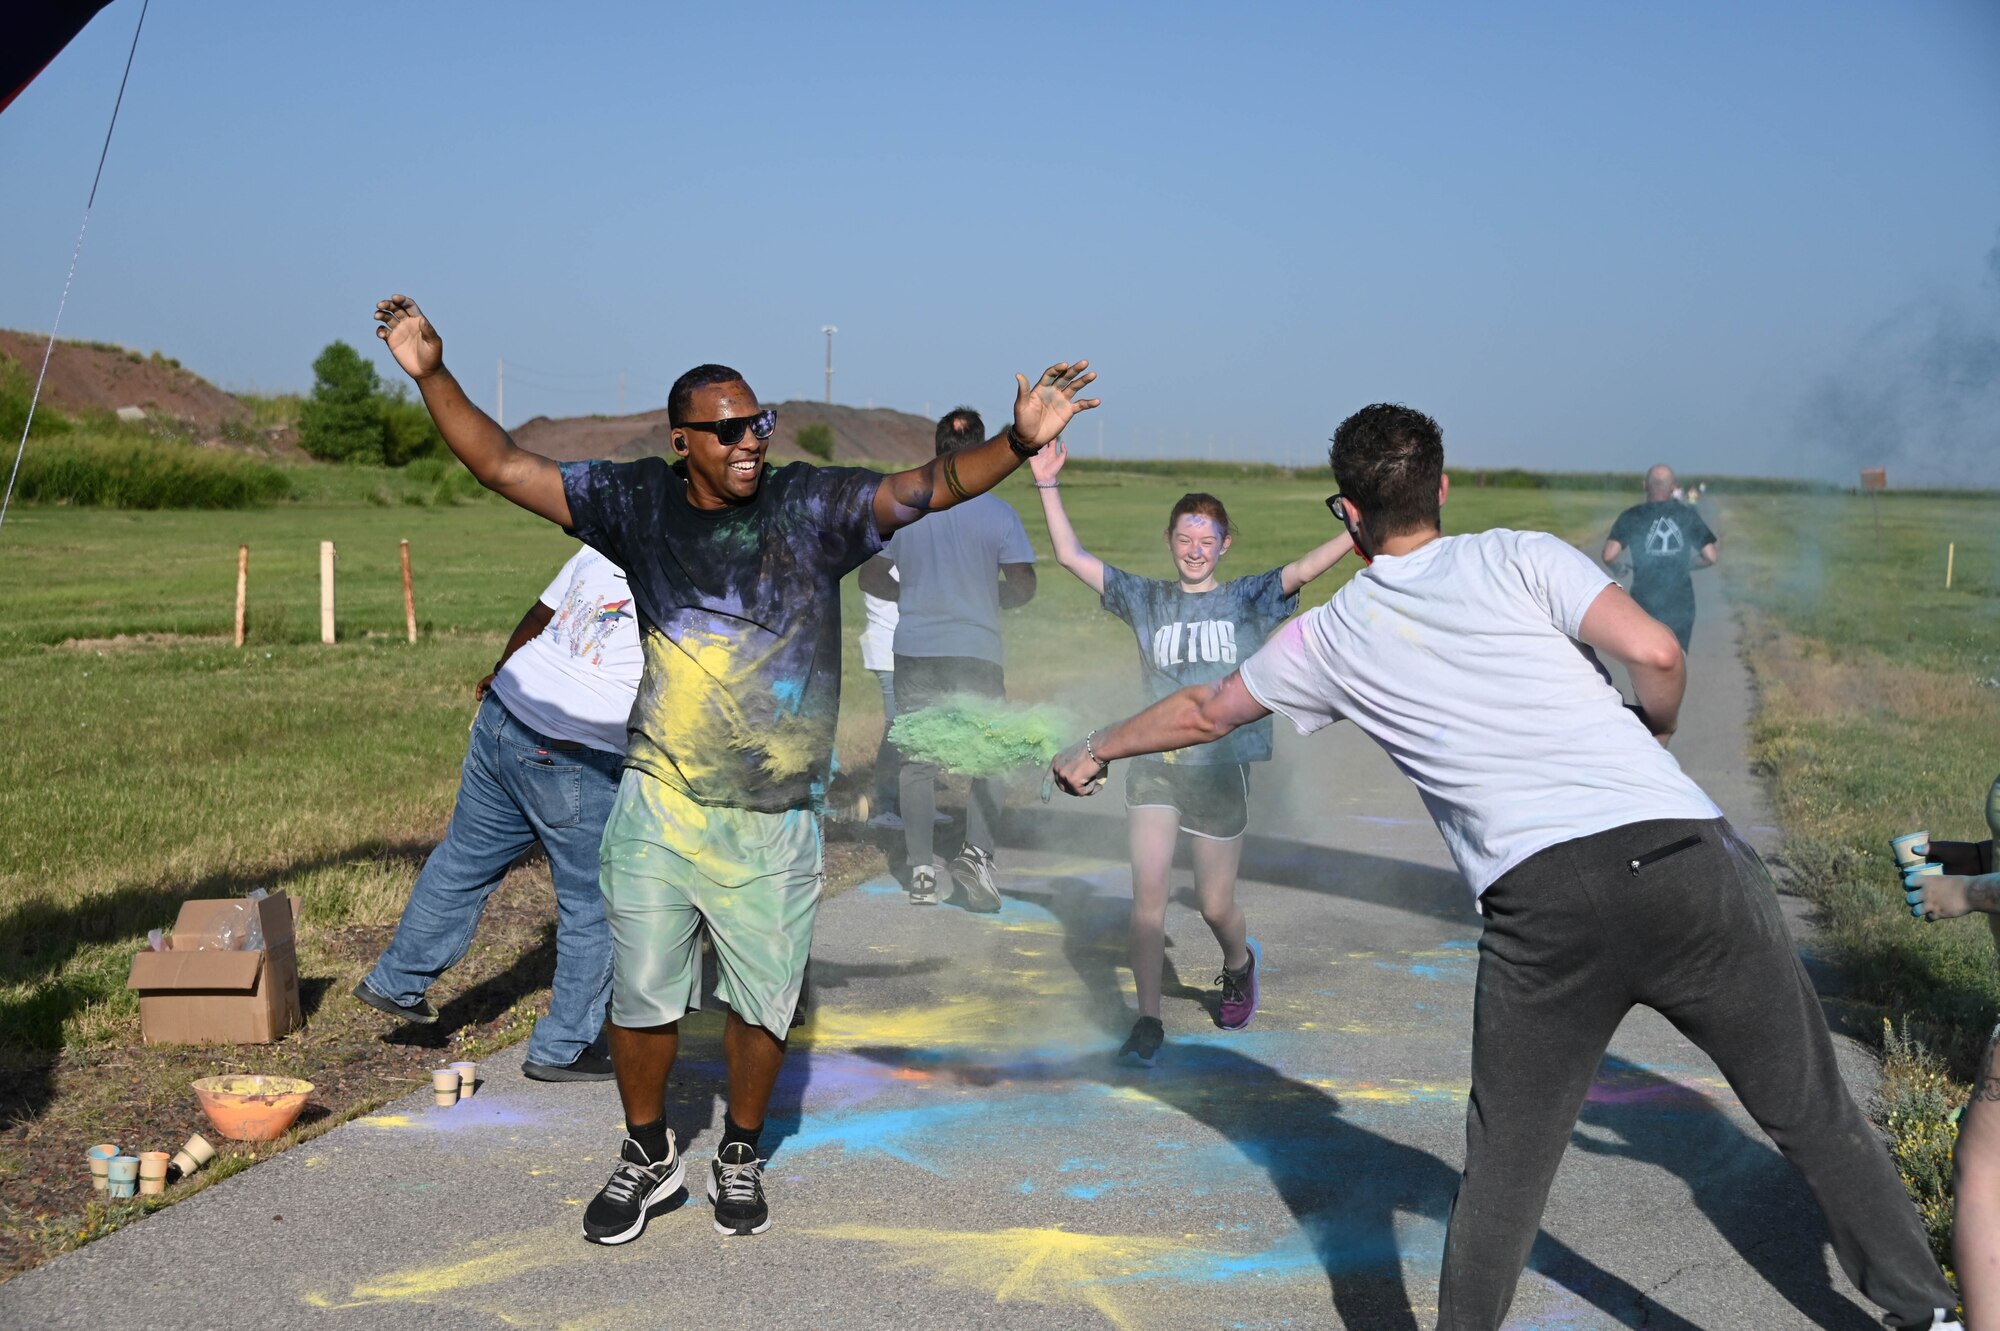 U.S. Air Force Master Sgt. Kenneth Williams-Prades, 97th Force Support Squadron first sergeant, runs through the finish line during the Pride Month color run at Altus Air Force Base, Oklahoma, June 24, 2022. Pride month celebrates the lesbian, gay, bisexual, transgender and queer community, among others. (U.S. Air Force photo by Senior Airman Kayla Christenson)